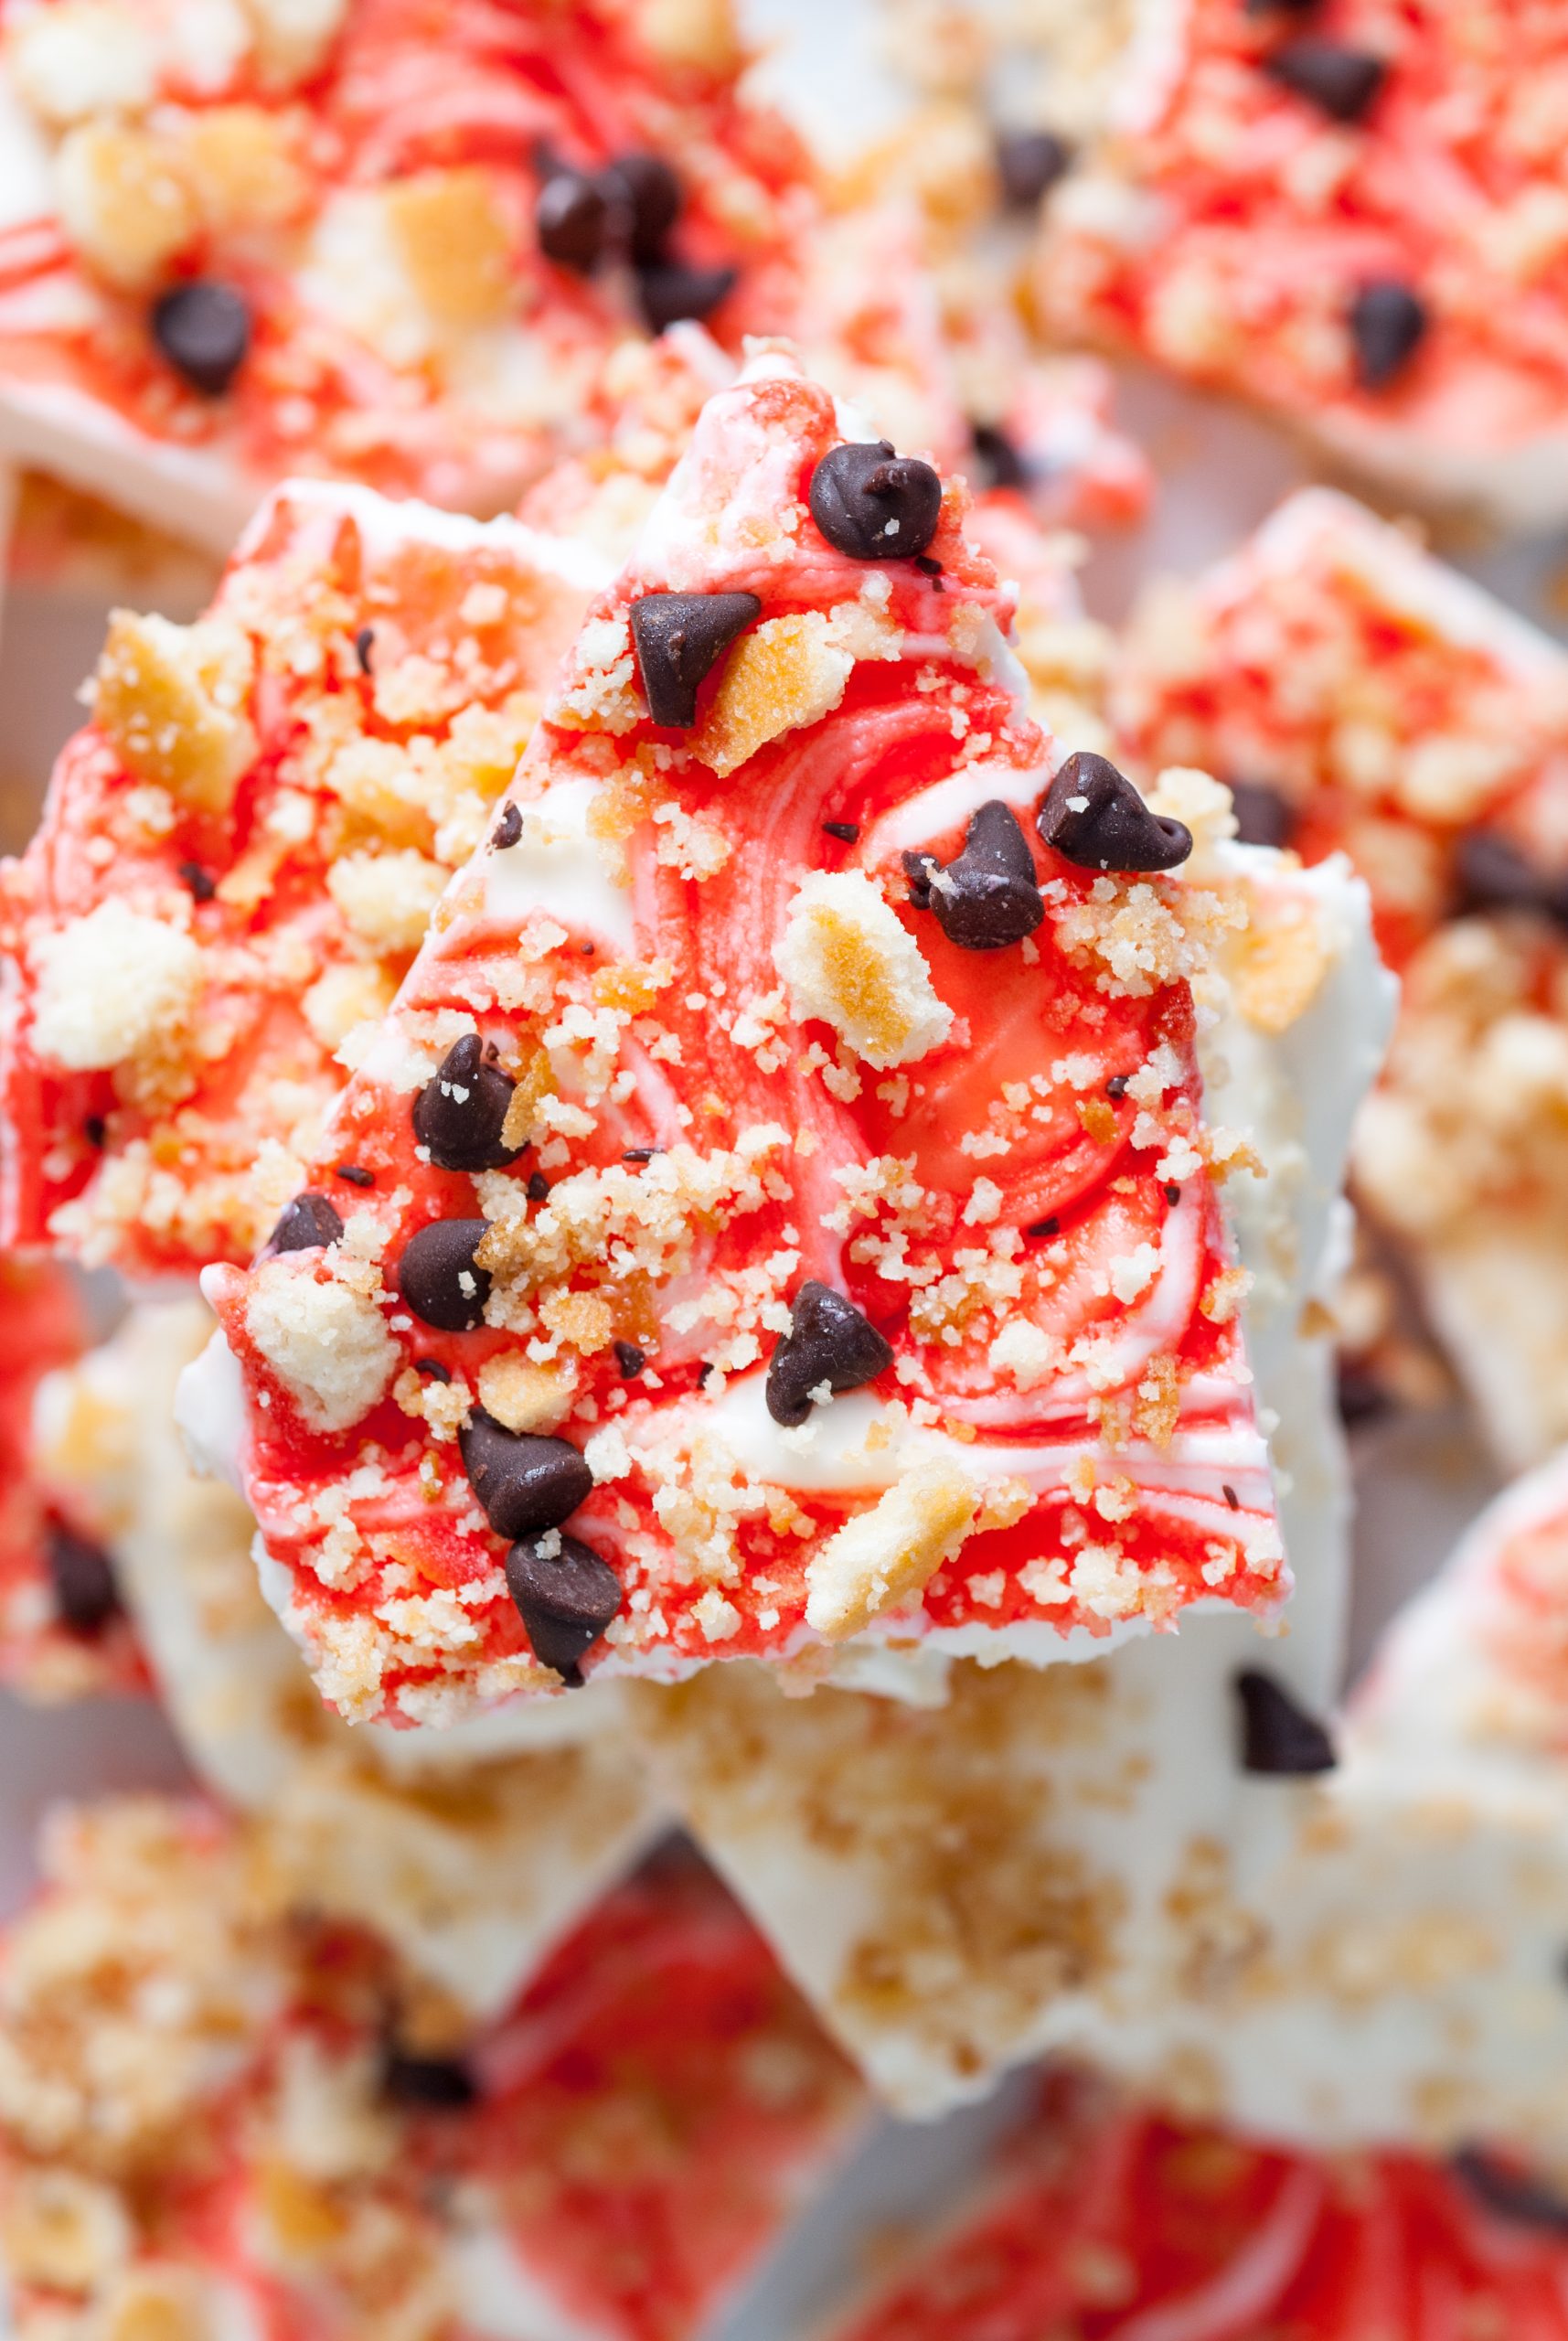 Festive strawberry swirl bark topped with crumbled cookies and dark chocolate chips.